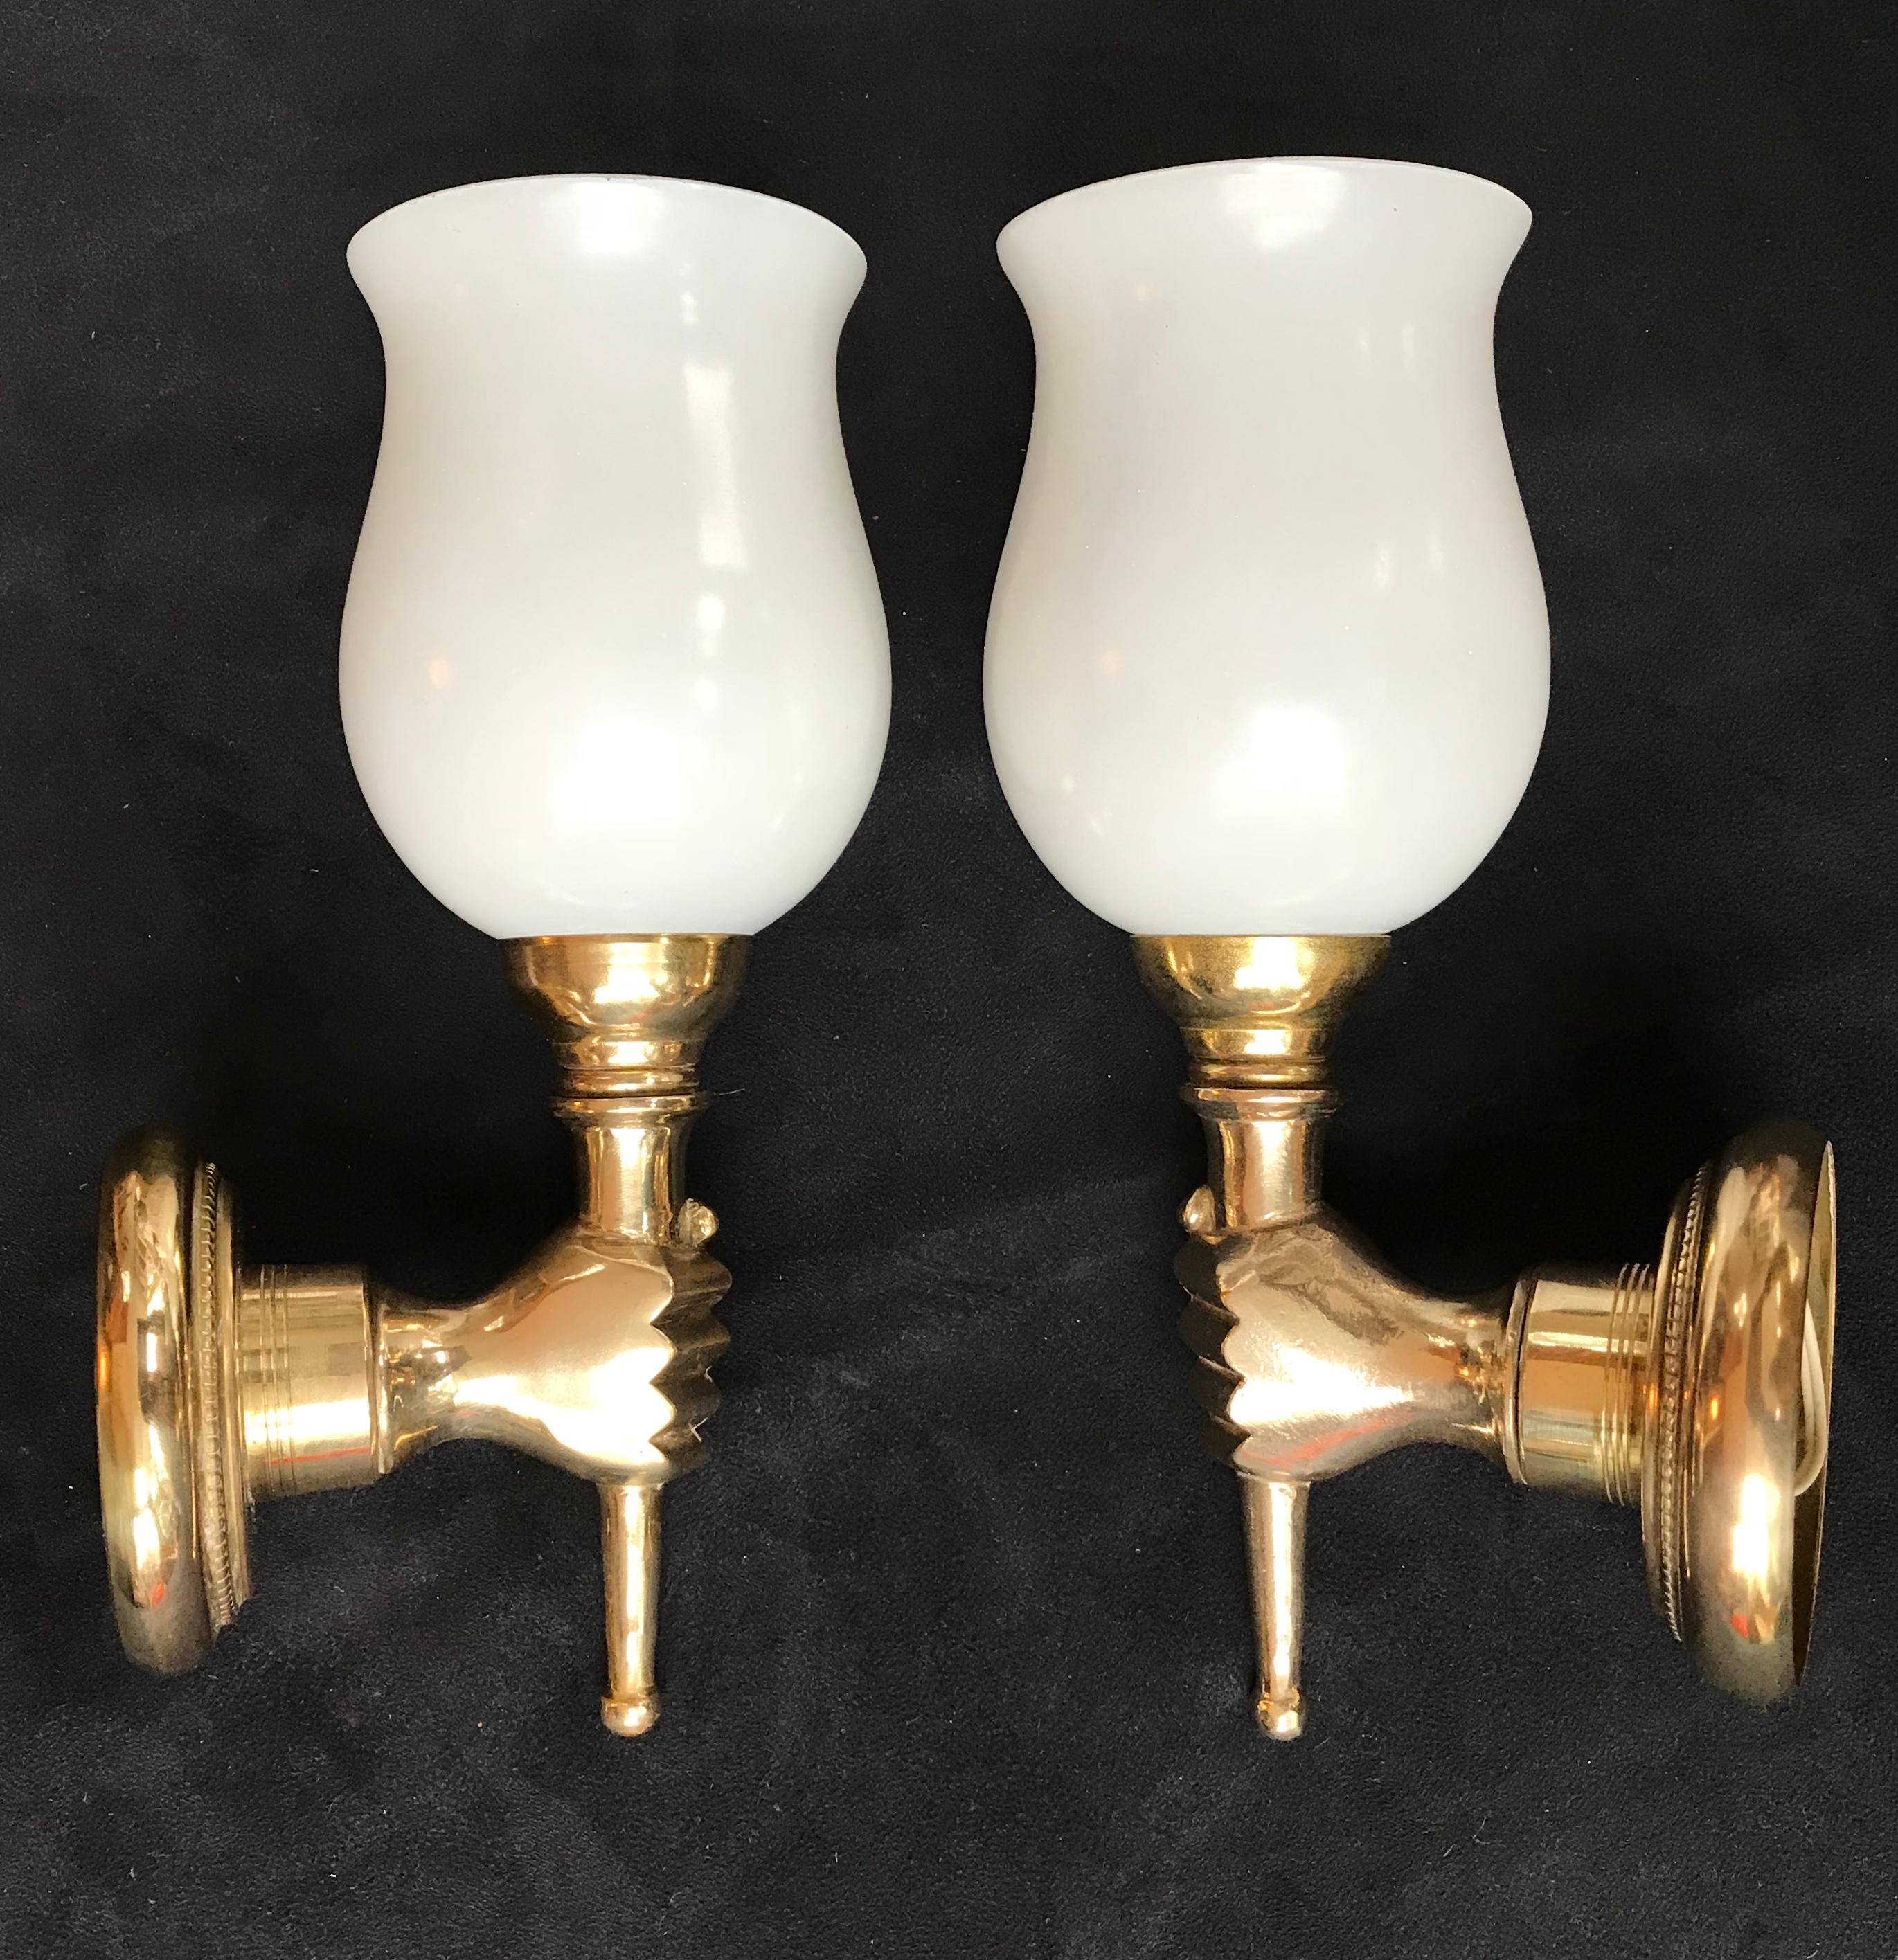 Elegant pair of Andre Arbus neoclassical wall sconces made in gilt bronze and opaline glasses.
France, 1950s in a very good general condition. Ready to pose on the wall. Sold by pair (2 sconces).
About André Arbus:
Arbus was born in Toulouse in